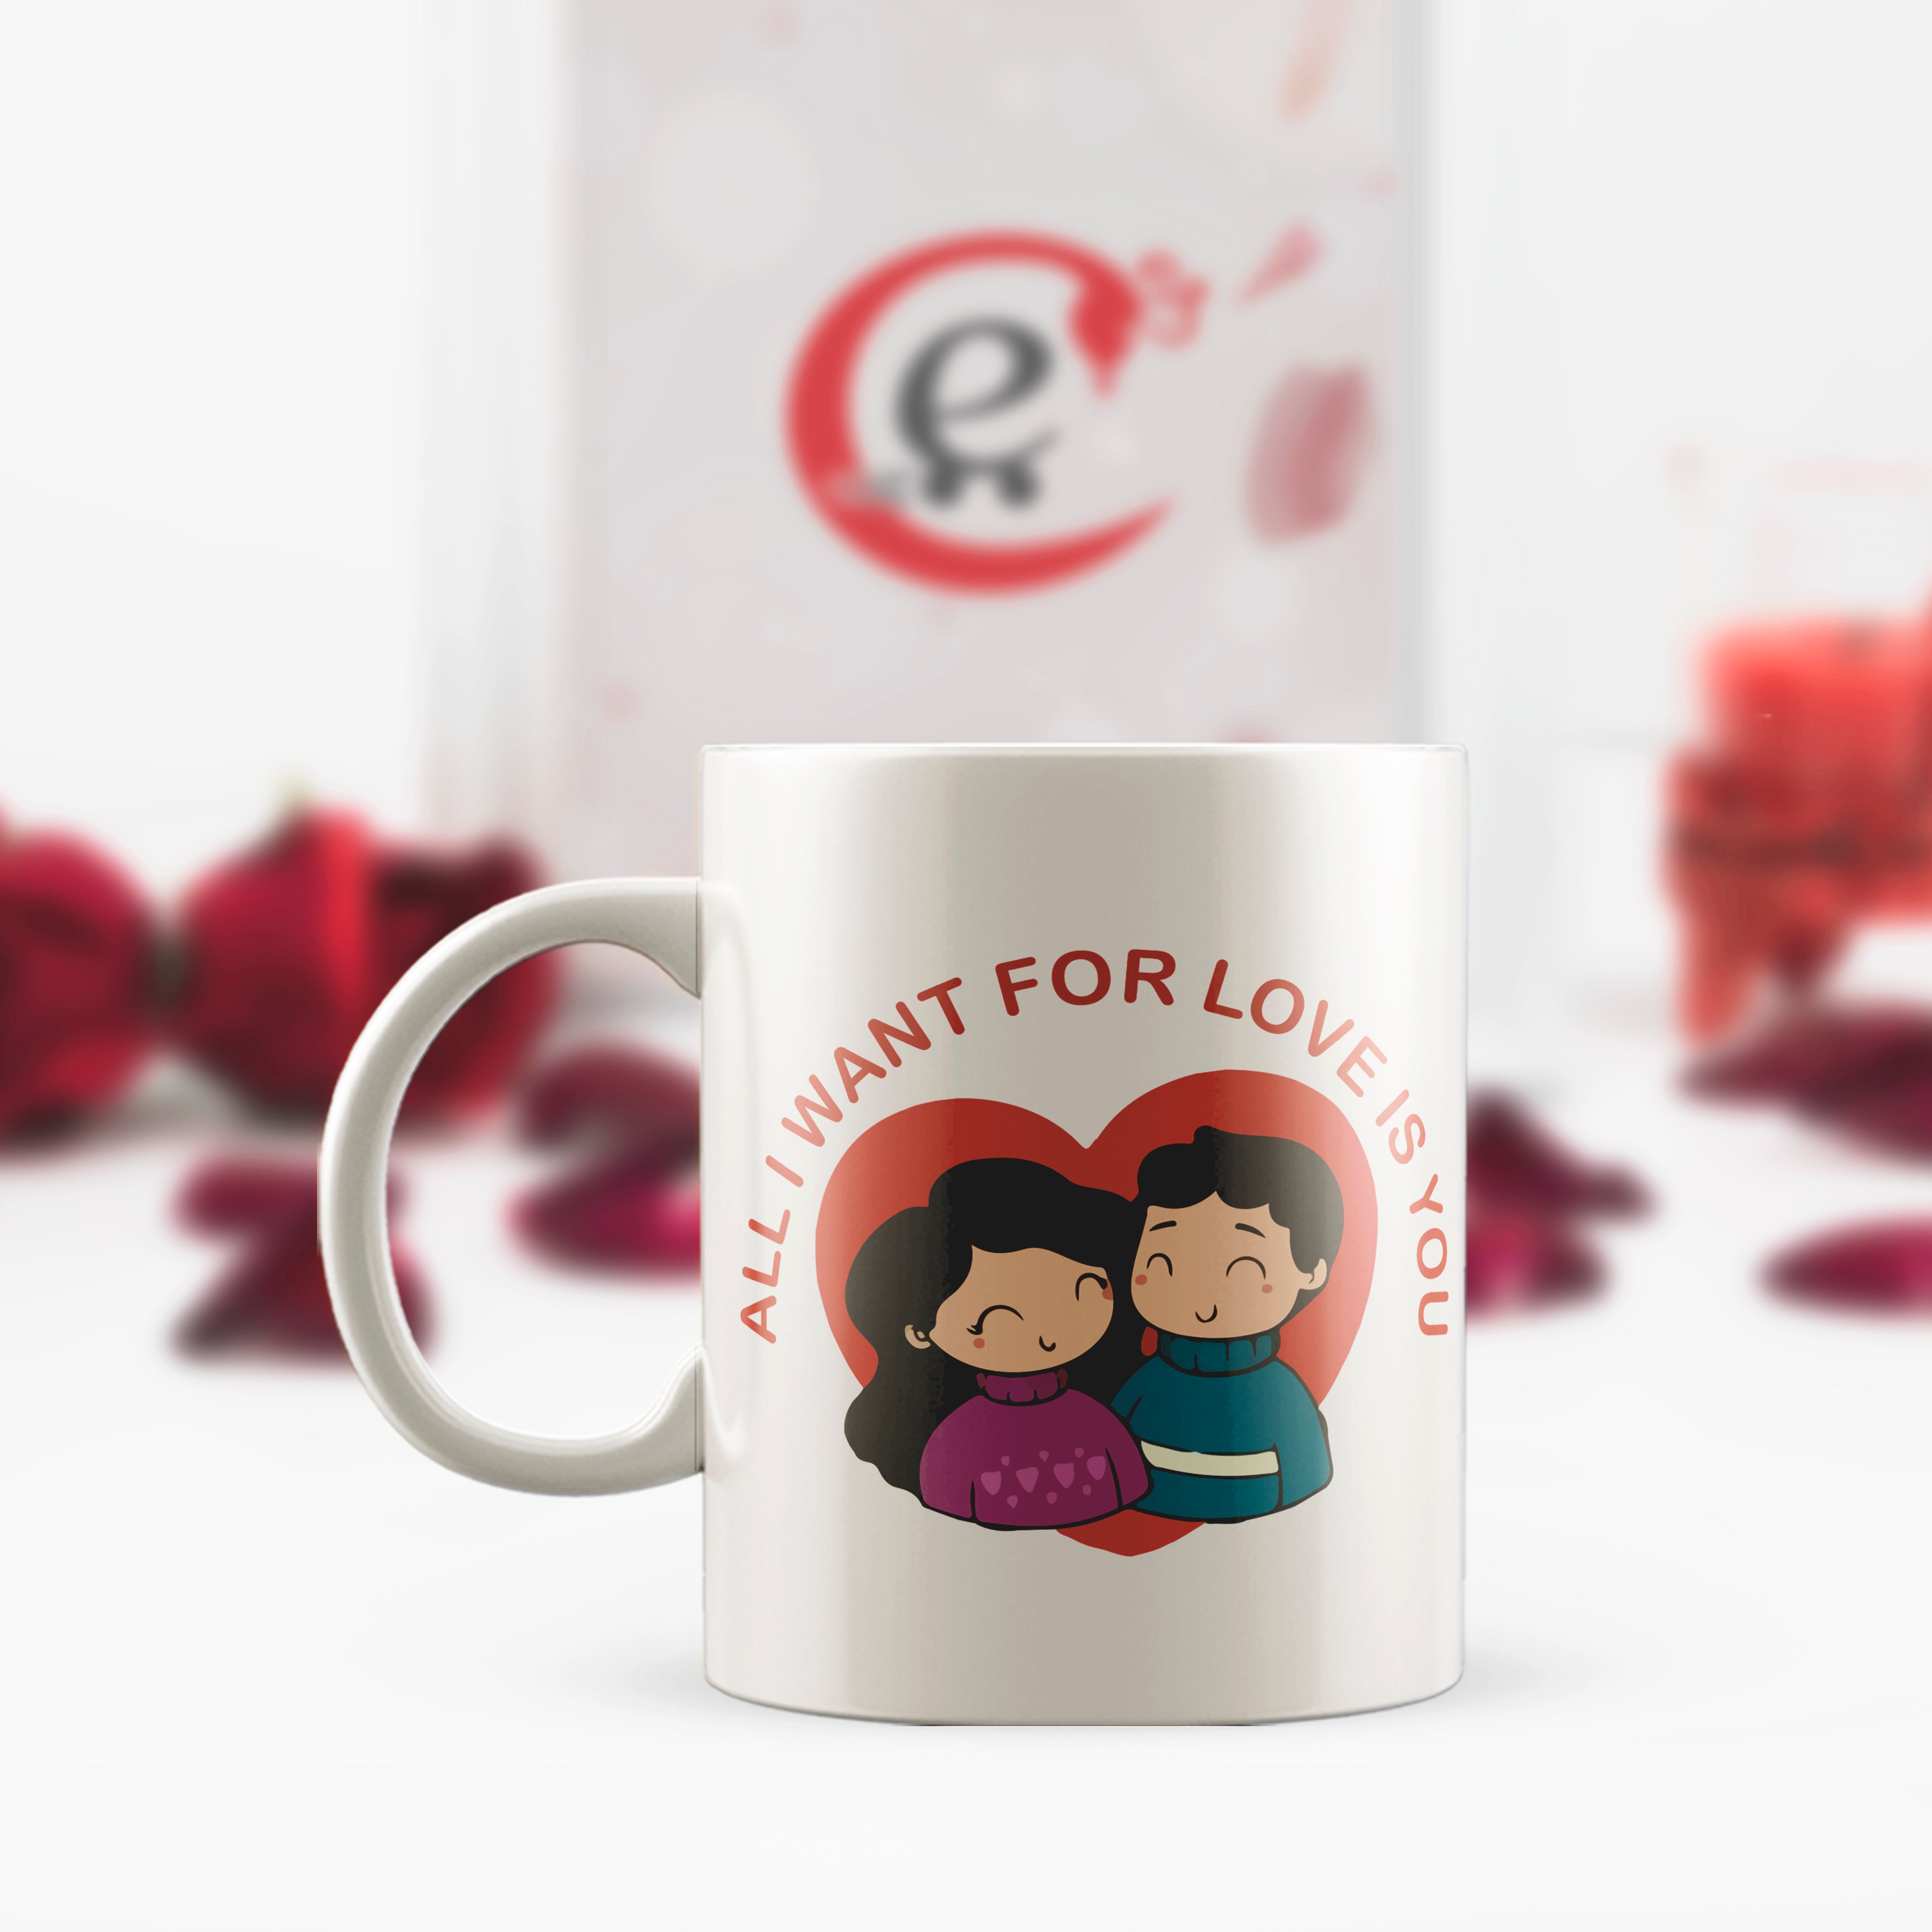 "All I want for Love is you" Valentine Love theme Ceramic Coffee Mug